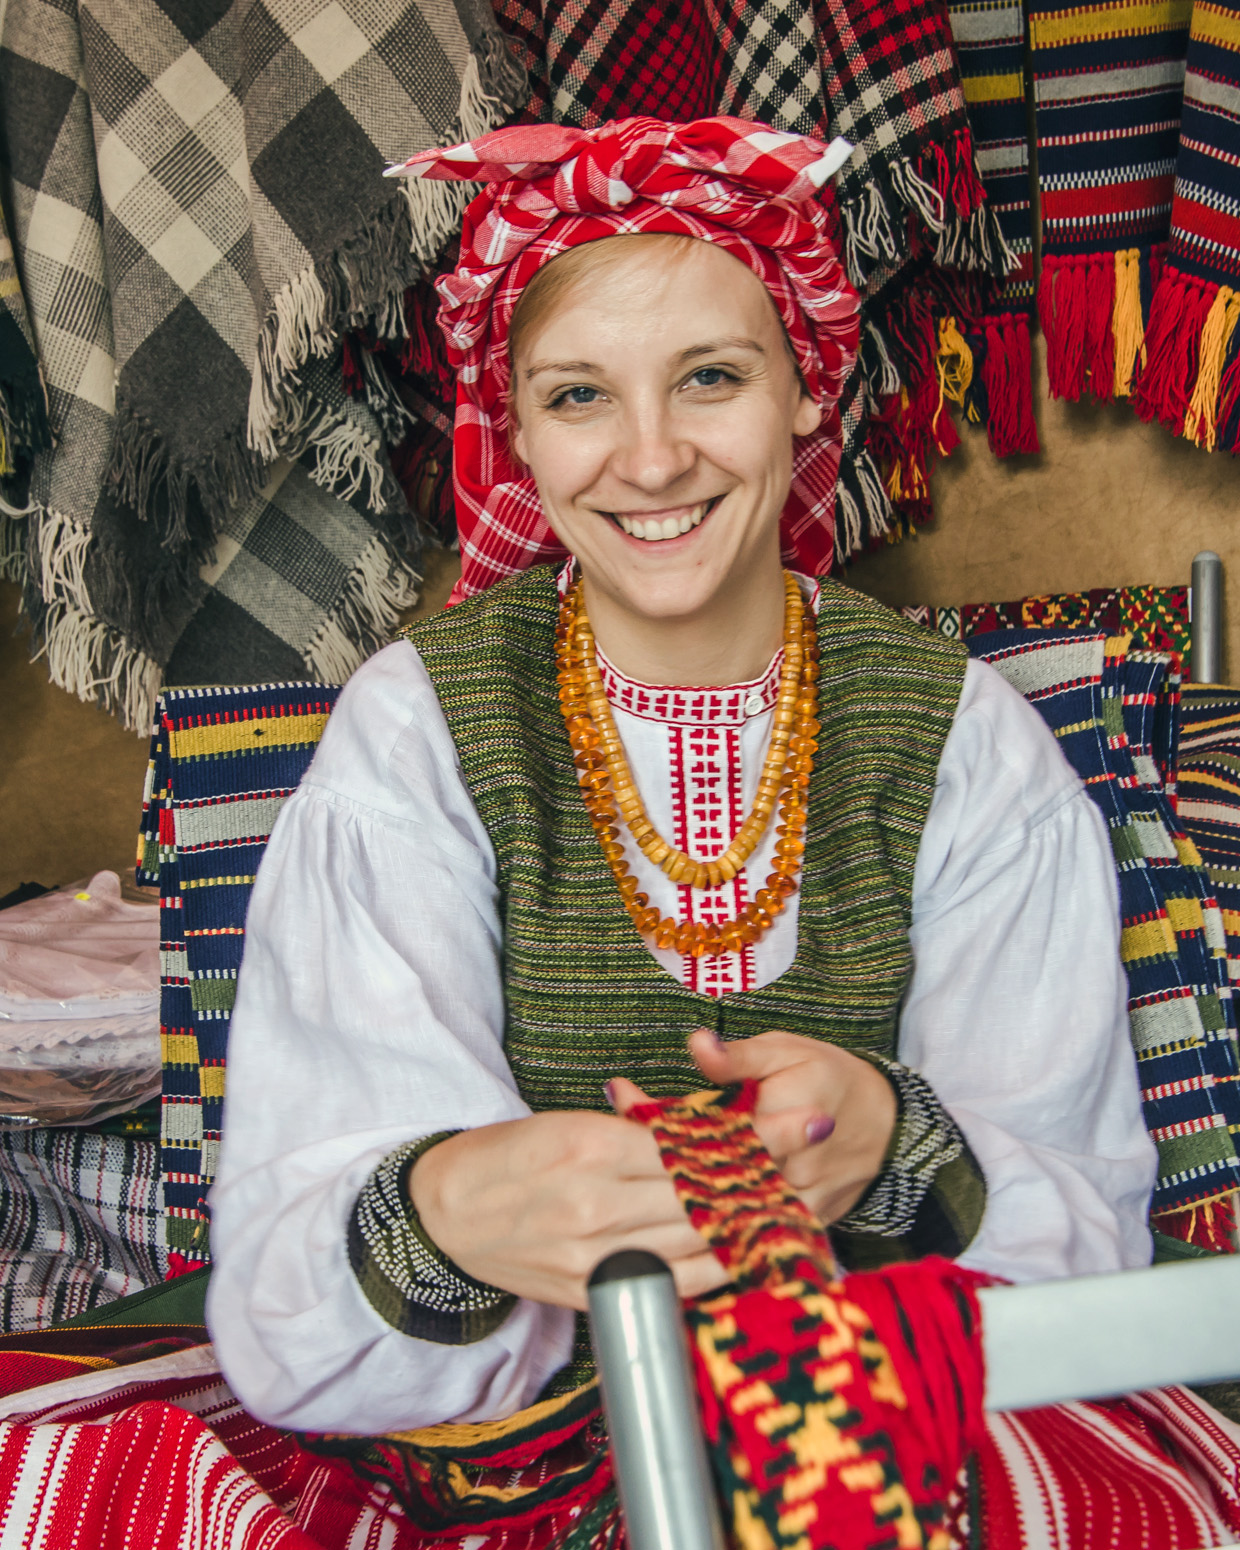 Lithuanian smiling girl with her handigrafts